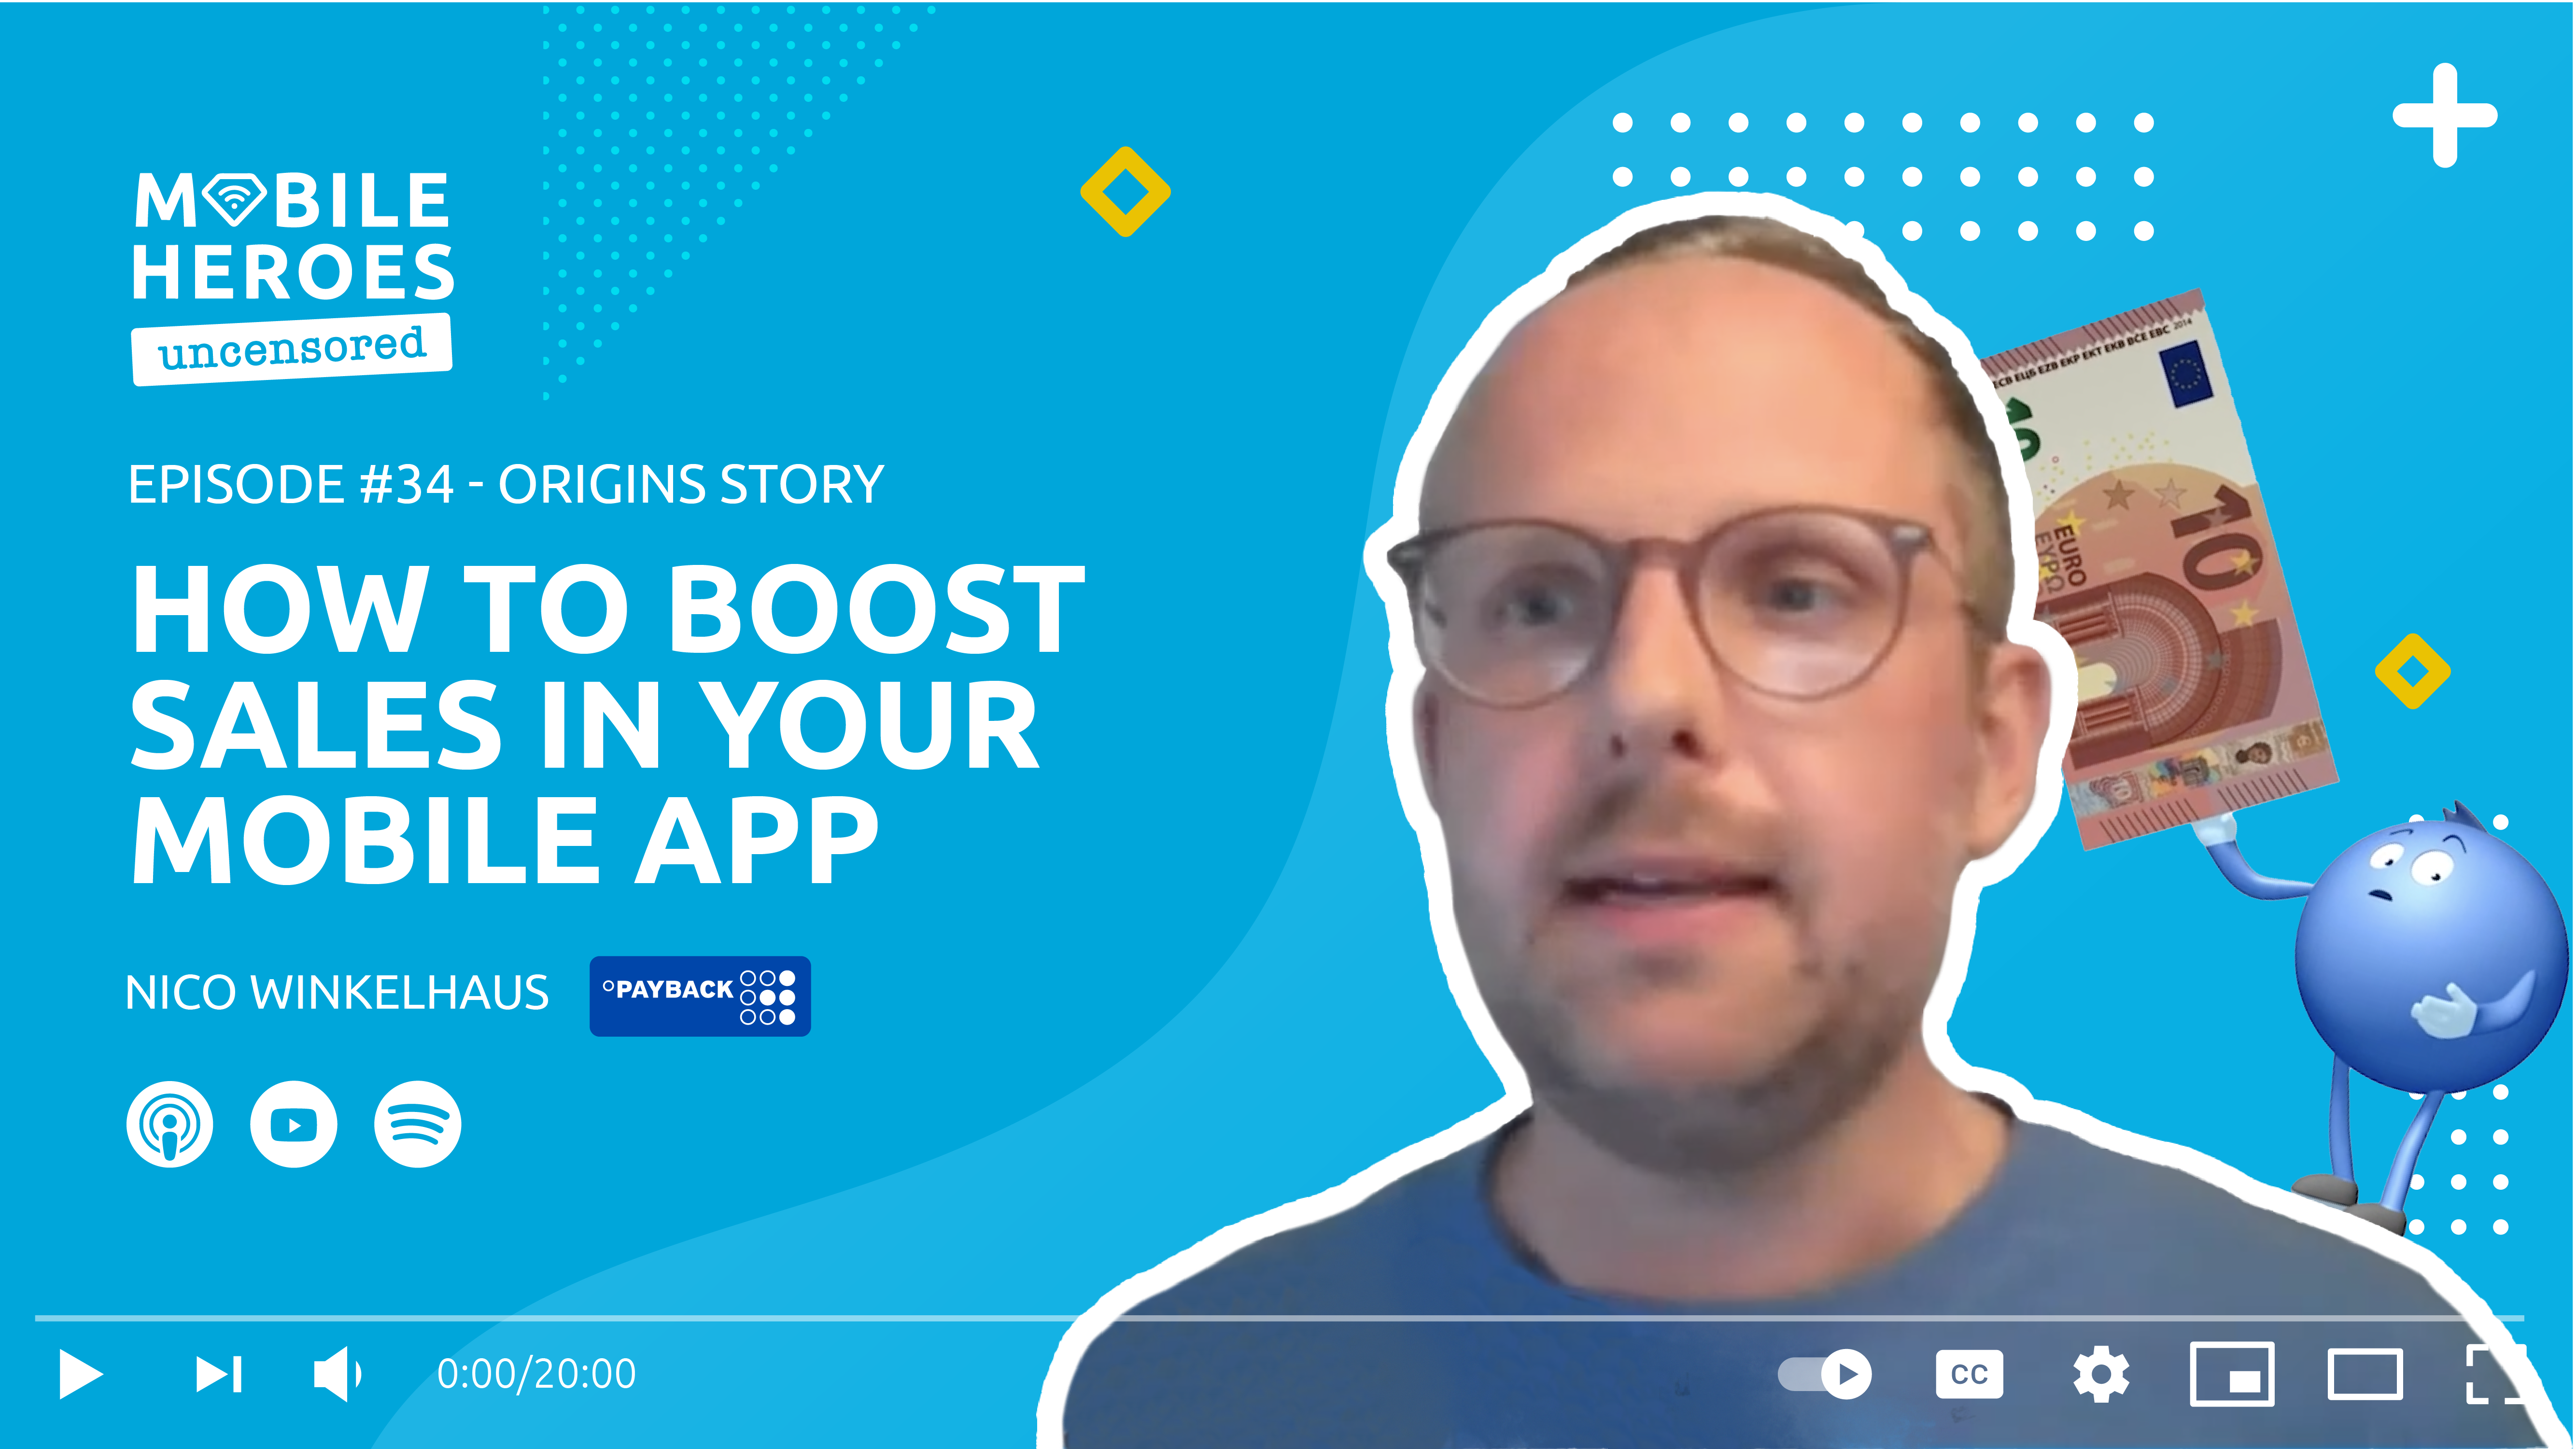 Episode #34: How To Boost Sales in Your Mobile App